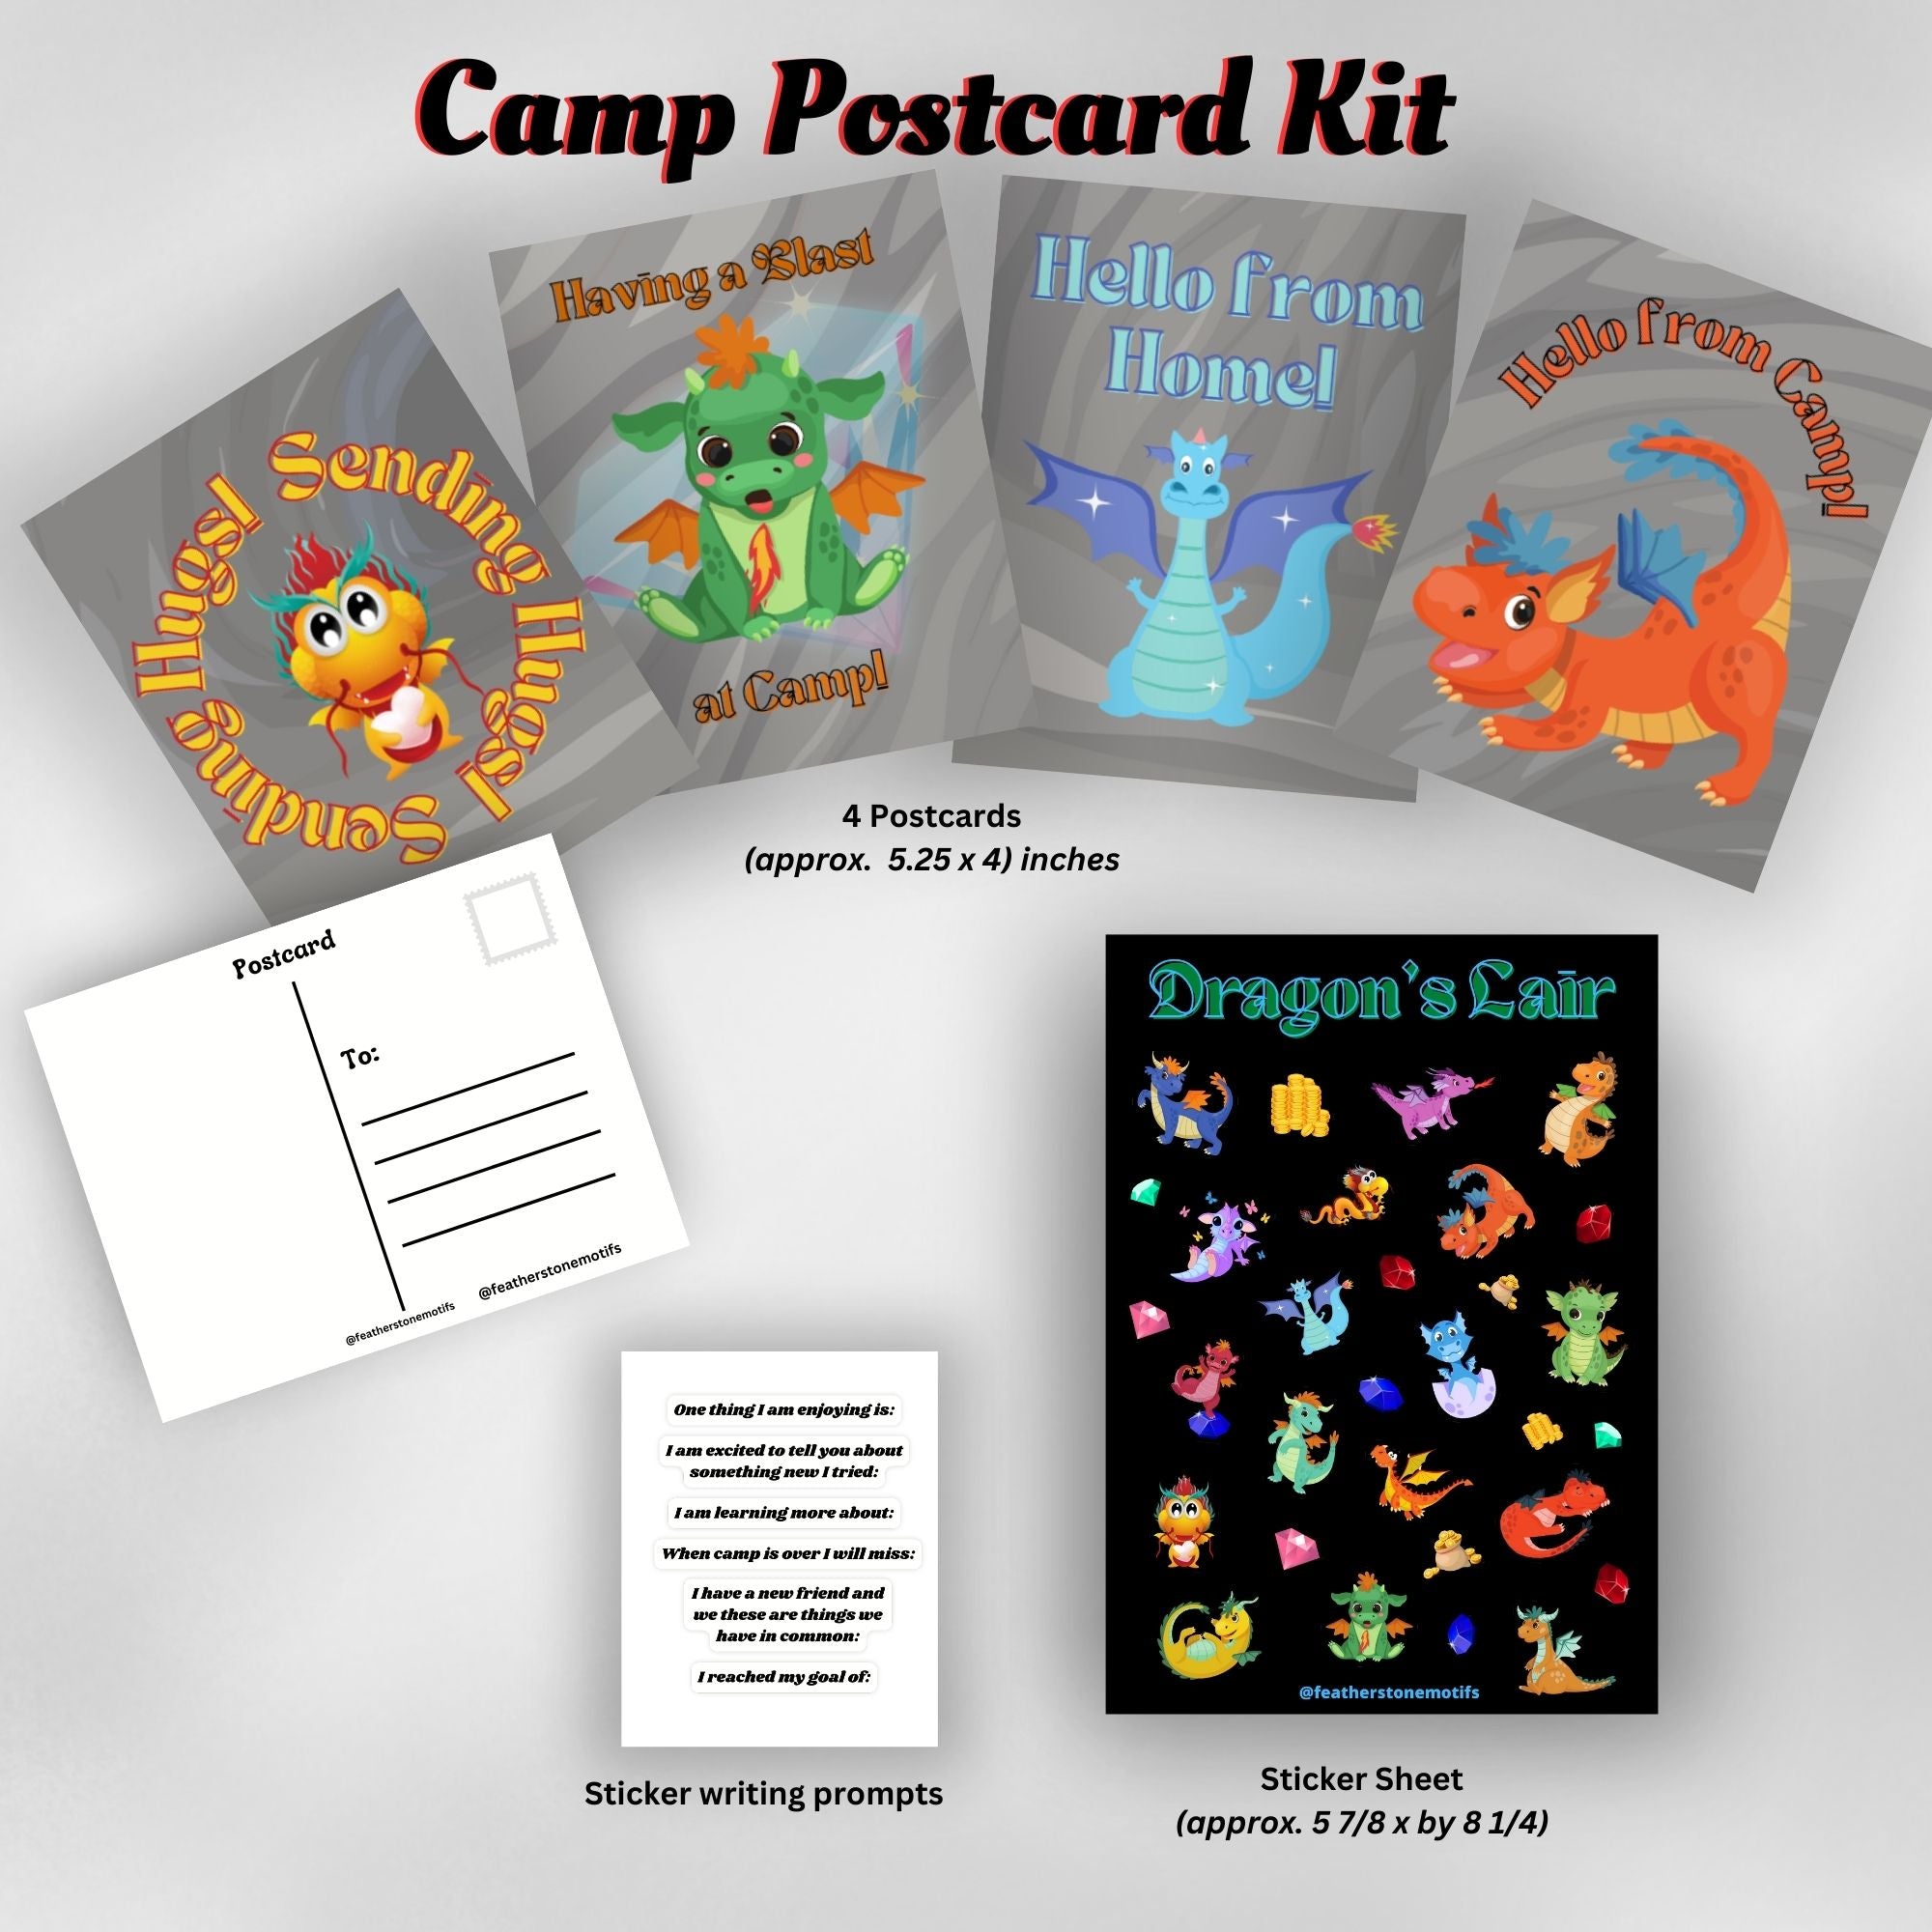 This image shows the Dragon's Lair themed Camp Postcard Kit with descriptions and dimensions for each item.